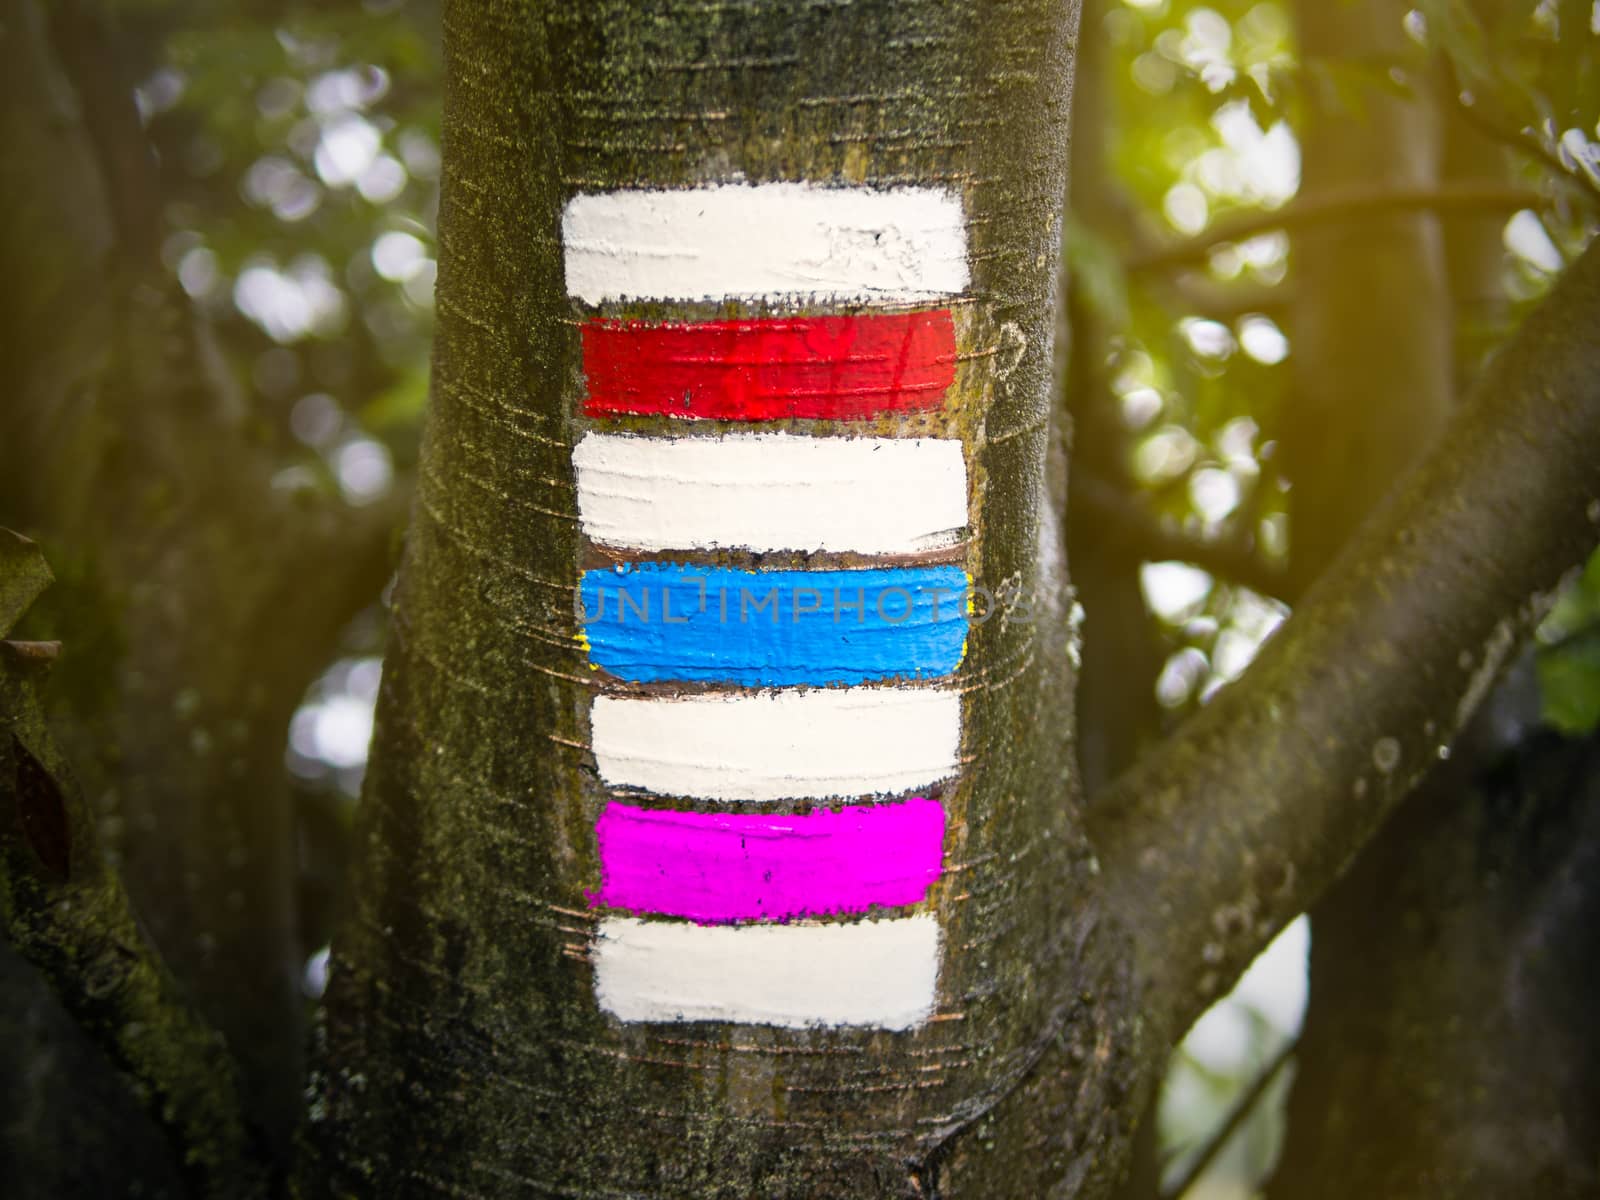 Triple hiking sign on the tree trunk, red, blue and purple with blurred bokeh background, unusual Czech tourism symbol, summer walking vacation, copy space on sides